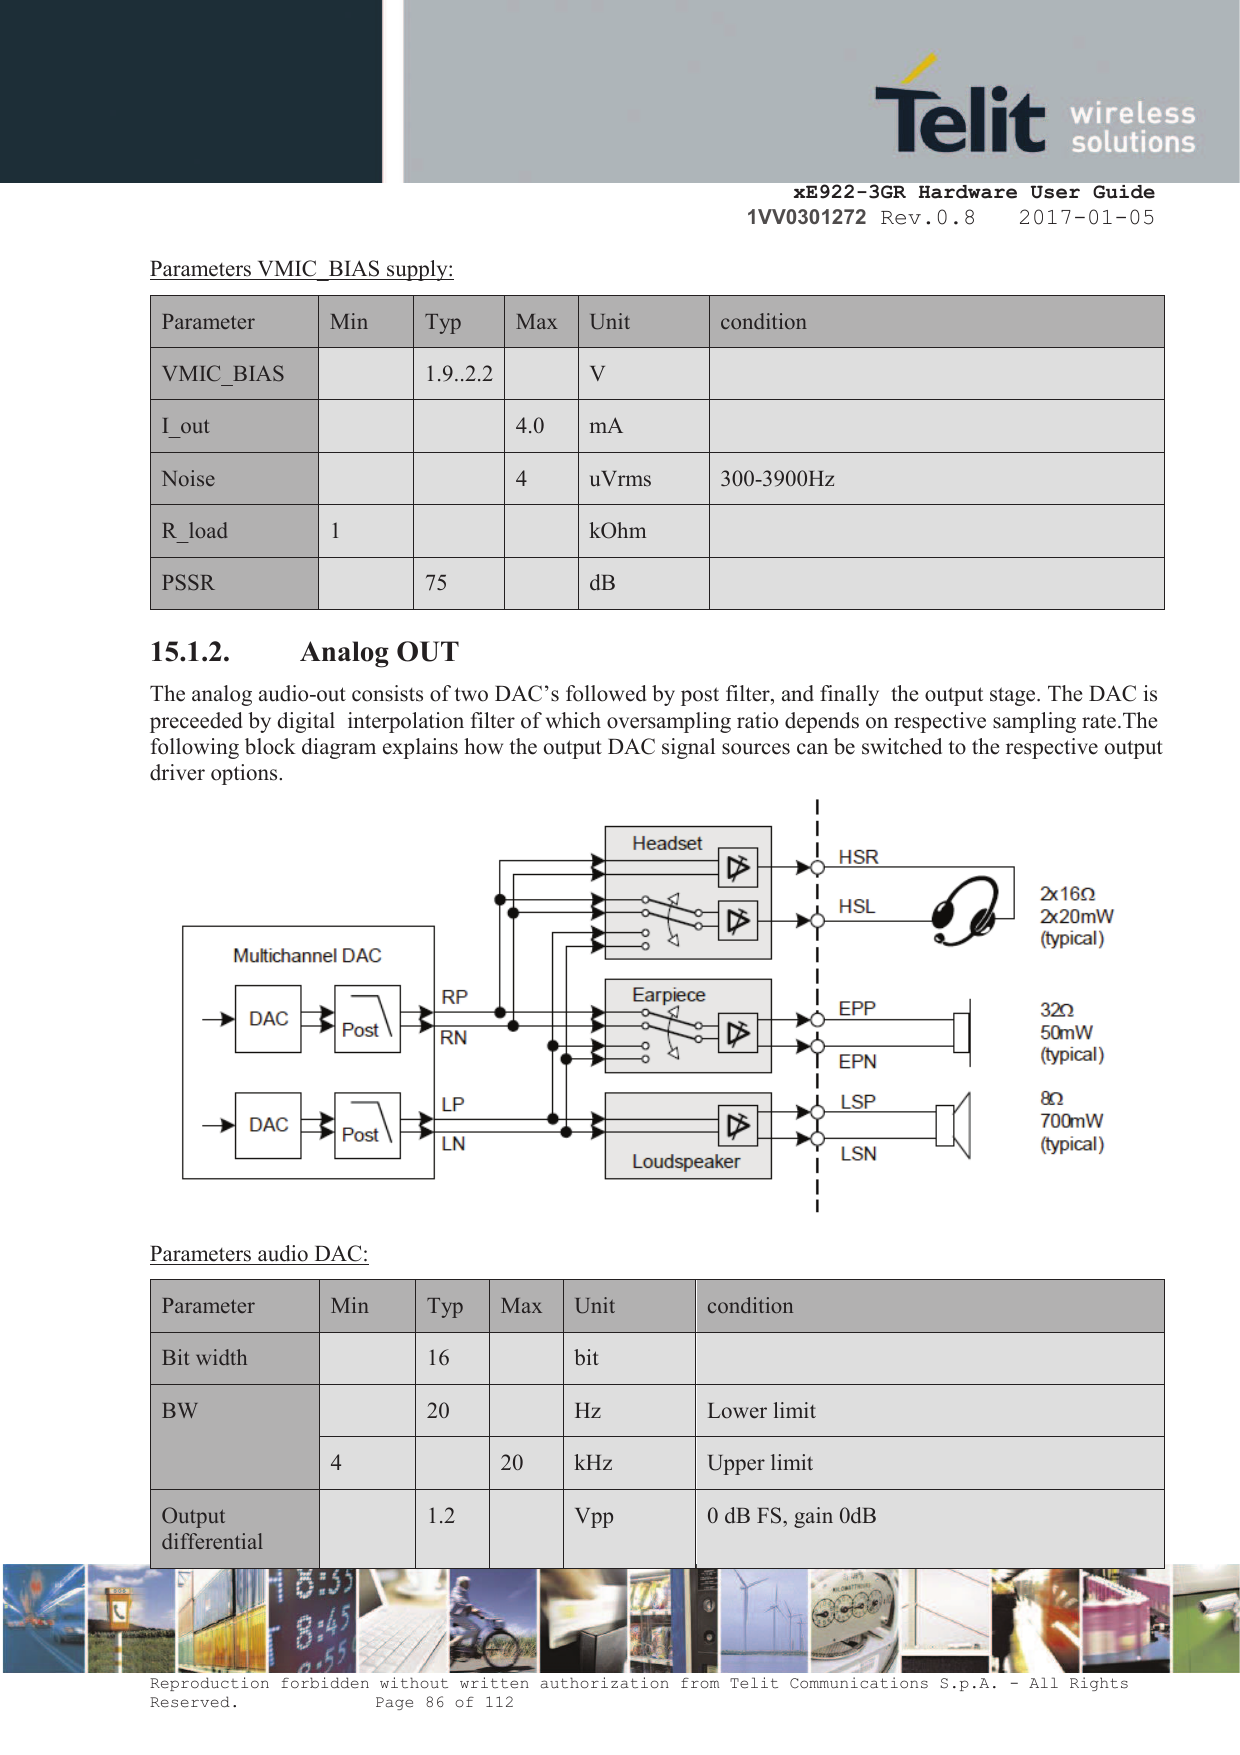     xE922-3GR Hardware User Guide 1VV0301272 Rev.0.8   2017-01-05 Reproduction forbidden without written authorization from Telit Communications S.p.A. - All Rights Reserved.    Page 86 of 112  Parameters VMIC_BIAS supply: Parameter  Min Typ Max Unit condition VMIC_BIAS  1.9..2.2  V  I_out   4.0 mA  Noise   4 uVrms 300-3900Hz R_load 1   kOhm  PSSR  75  dB  15.1.2. Analog OUT The analog audio-out consists of two DAC’s followed by post filter, and finally  the output stage. The DAC is preceeded by digital  interpolation filter of which oversampling ratio depends on respective sampling rate.The following block diagram explains how the output DAC signal sources can be switched to the respective output driver options.  Parameters audio DAC: Parameter  Min Typ Max Unit condition Bit width  16  bit  BW  20  Hz Lower limit 4  20 kHz Upper limit Output differential   1.2  Vpp 0 dB FS, gain 0dB 